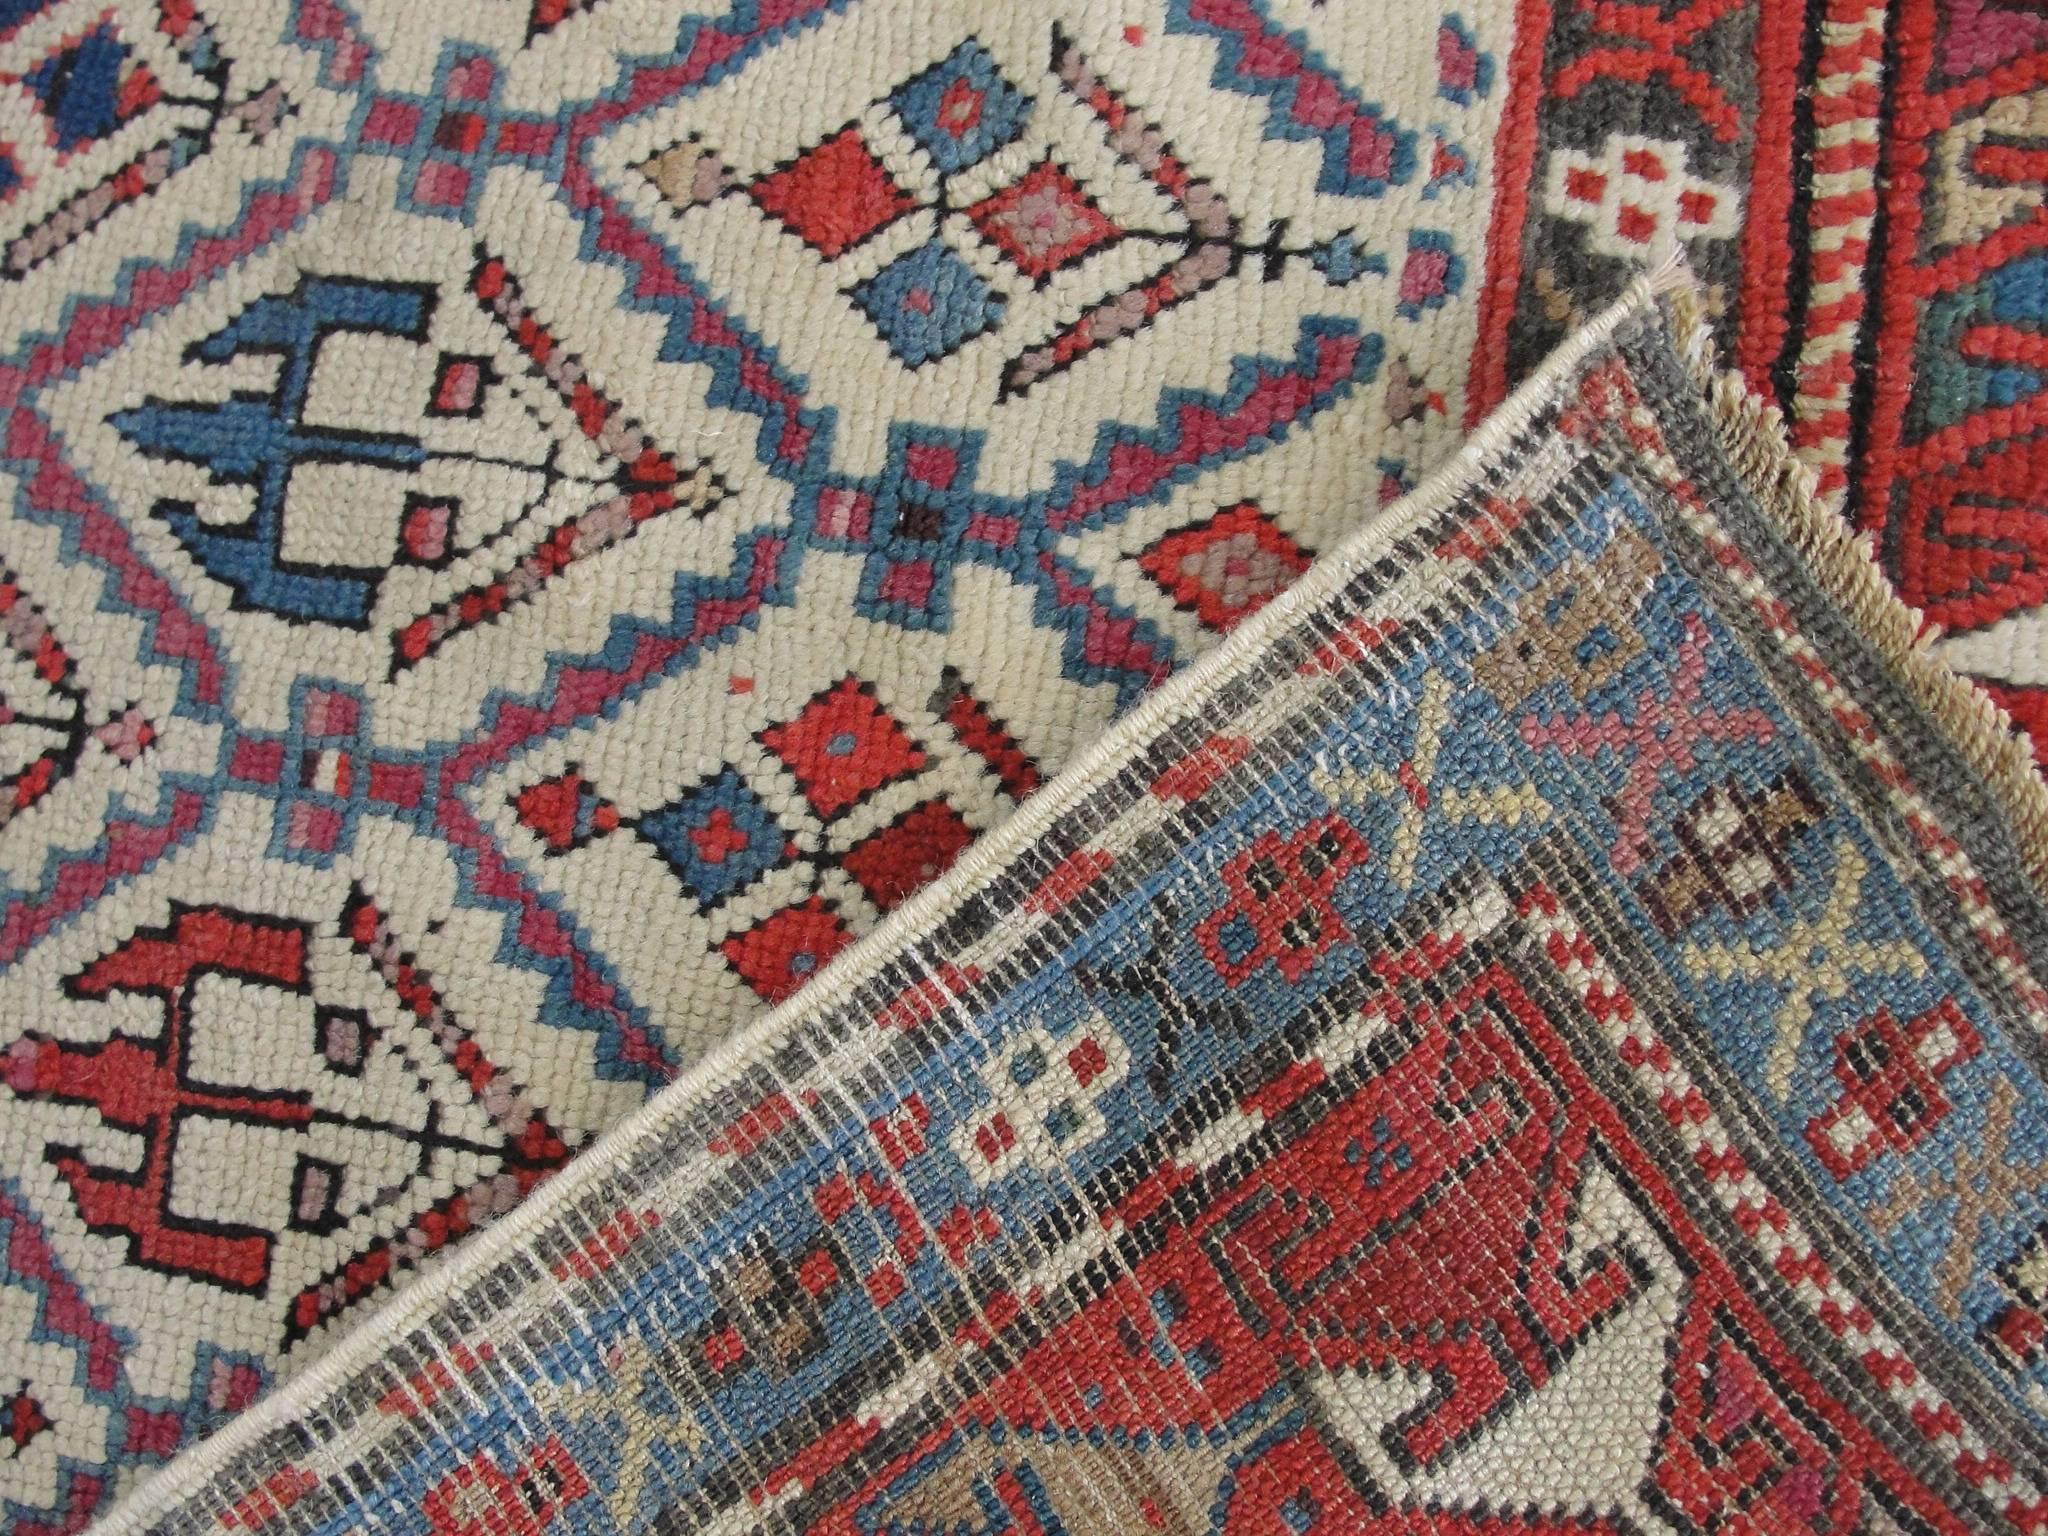 Antique Shirvan Prayer rug with multi-color motives on white background field.
The historic Khanate or administrative district of Shirvan produced many highly decorative antique rugs that have a formality and stylistic complexity that is found in